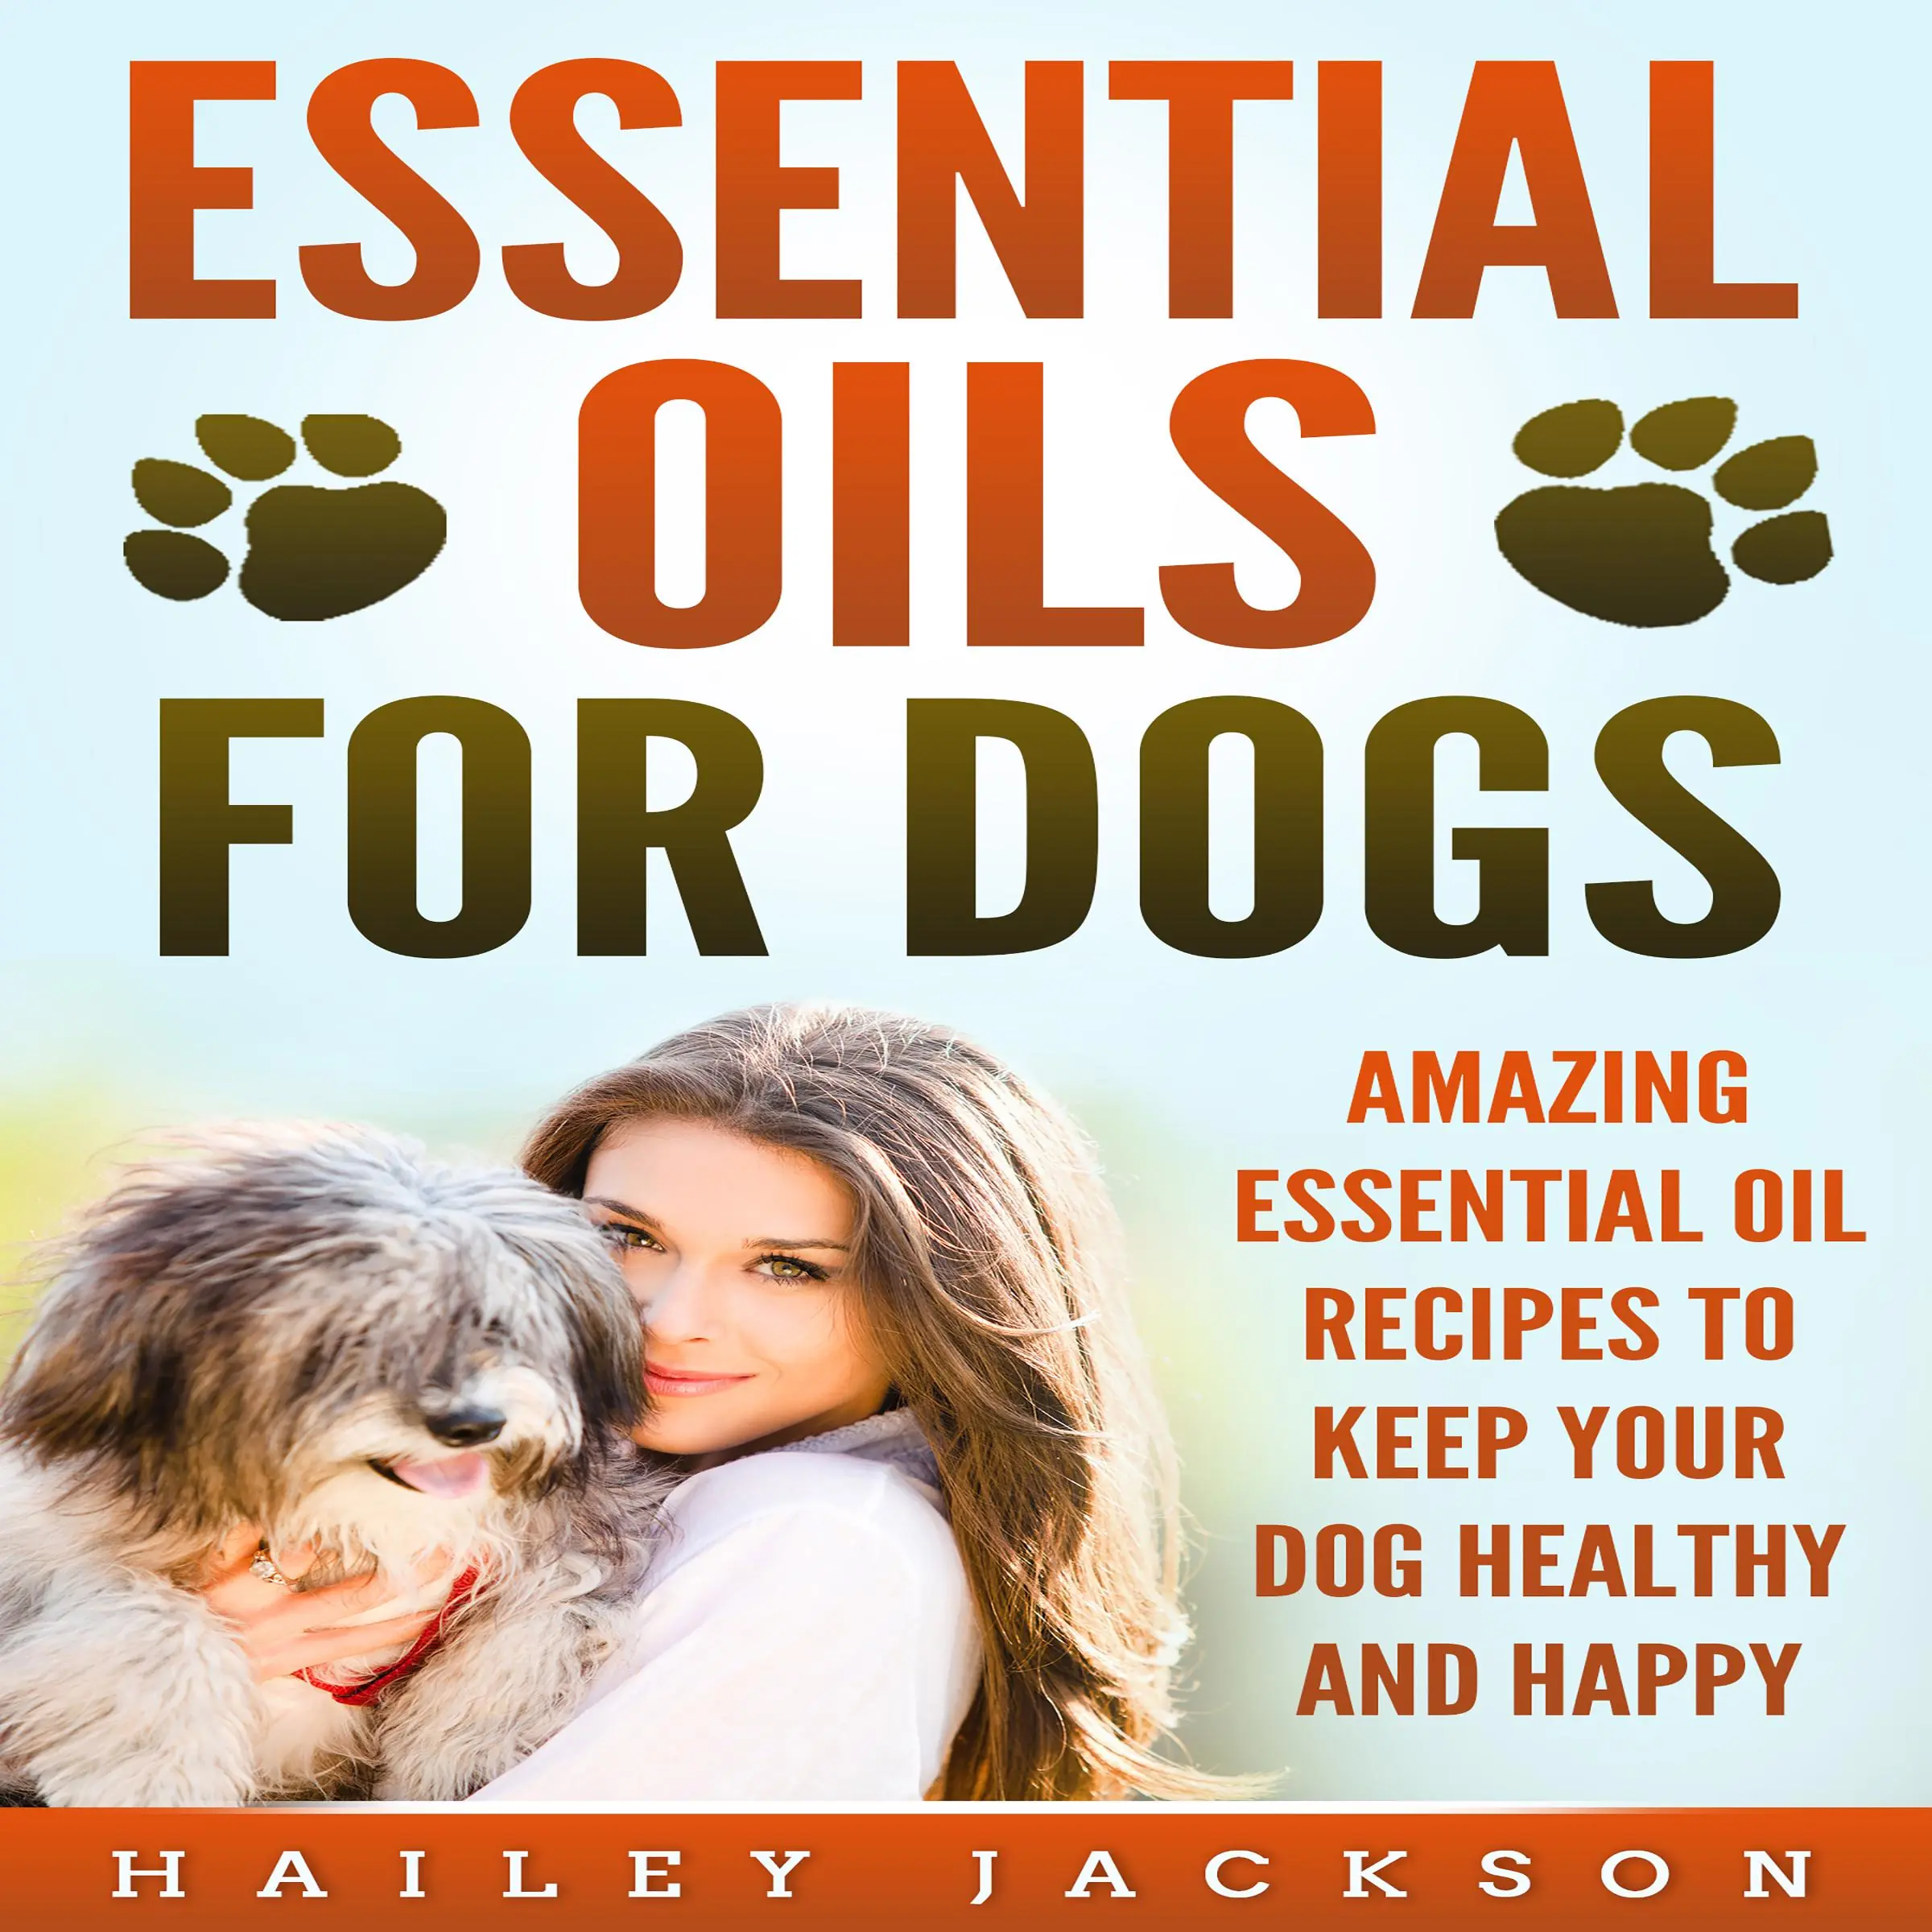 Essential Oils for Dogs: Amazing Essential Oil Recipes to Keep Your Dog Healthy and Happy Audiobook by Hailey Jackson